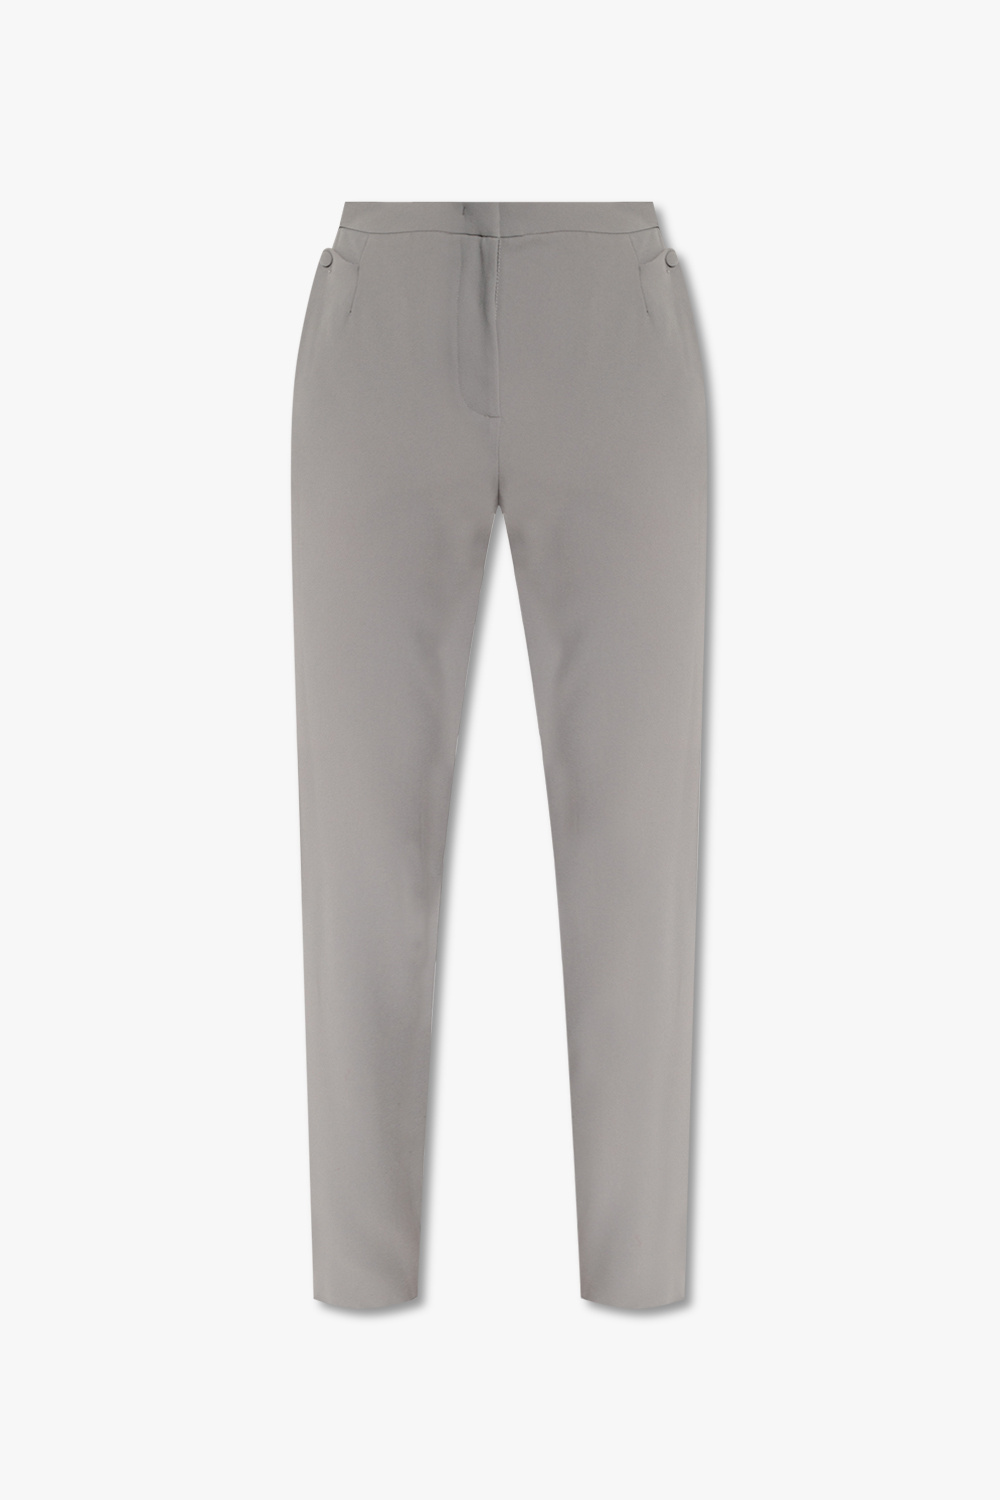 Emporio Armani Tapered Slides trousers